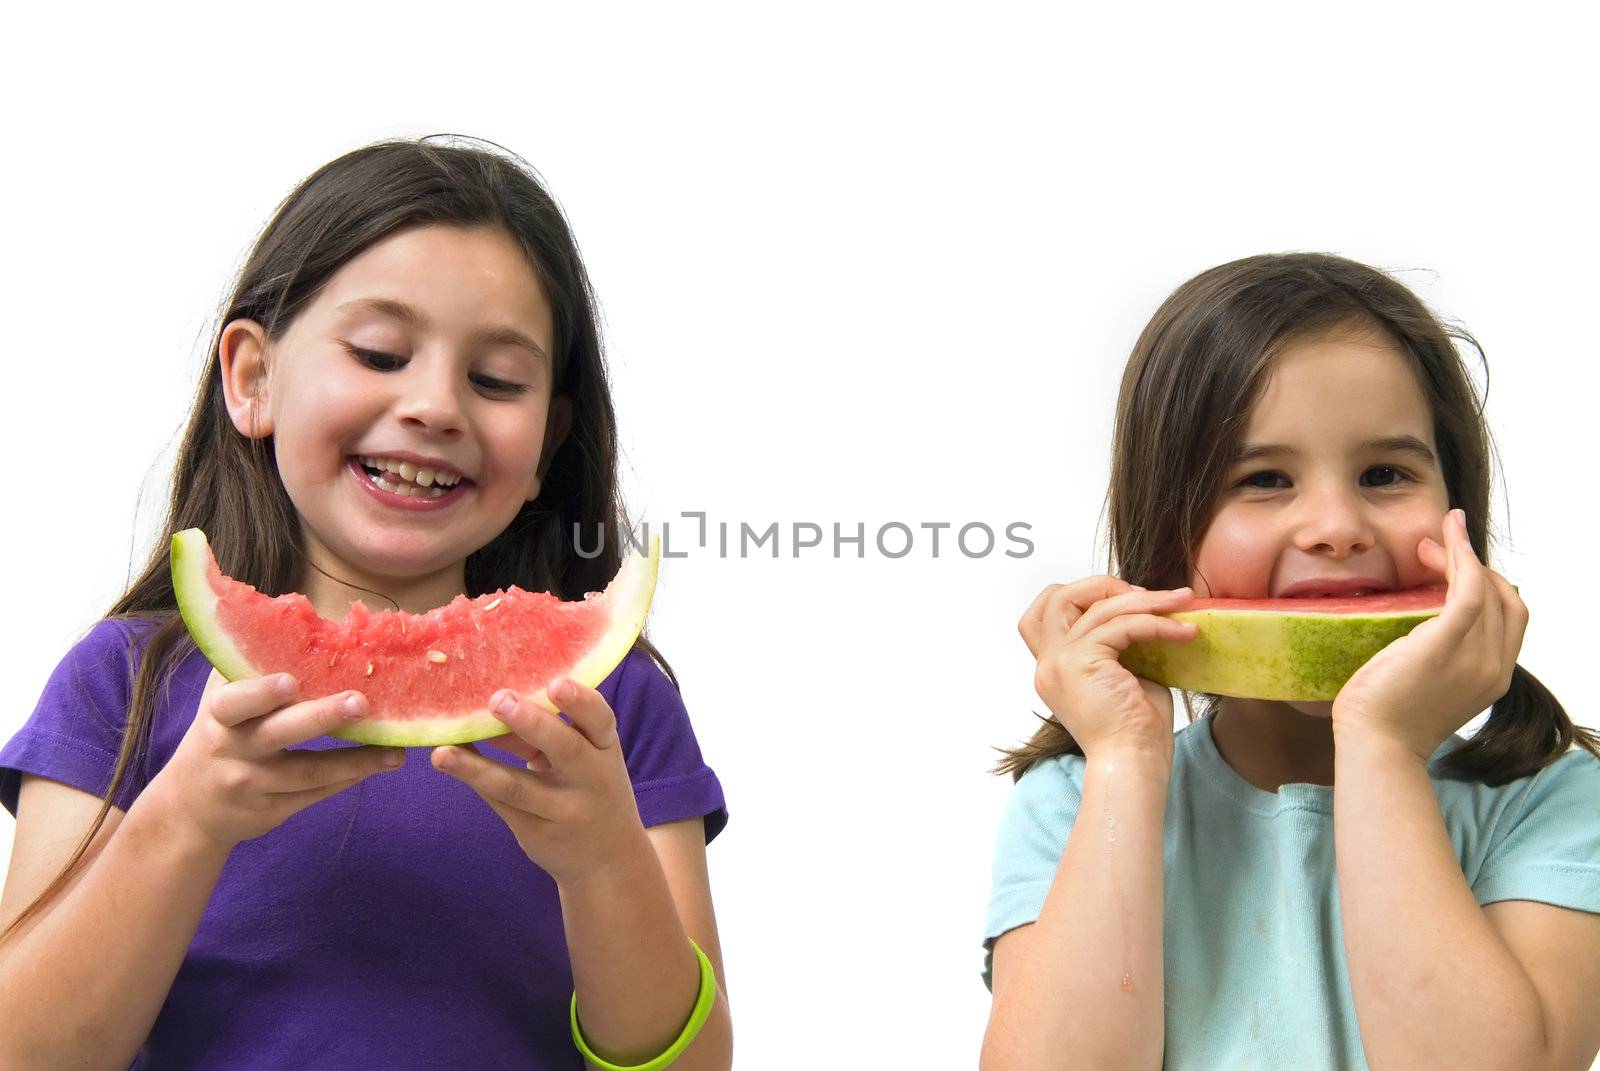 Two girls eating Watermelon isolated on white background